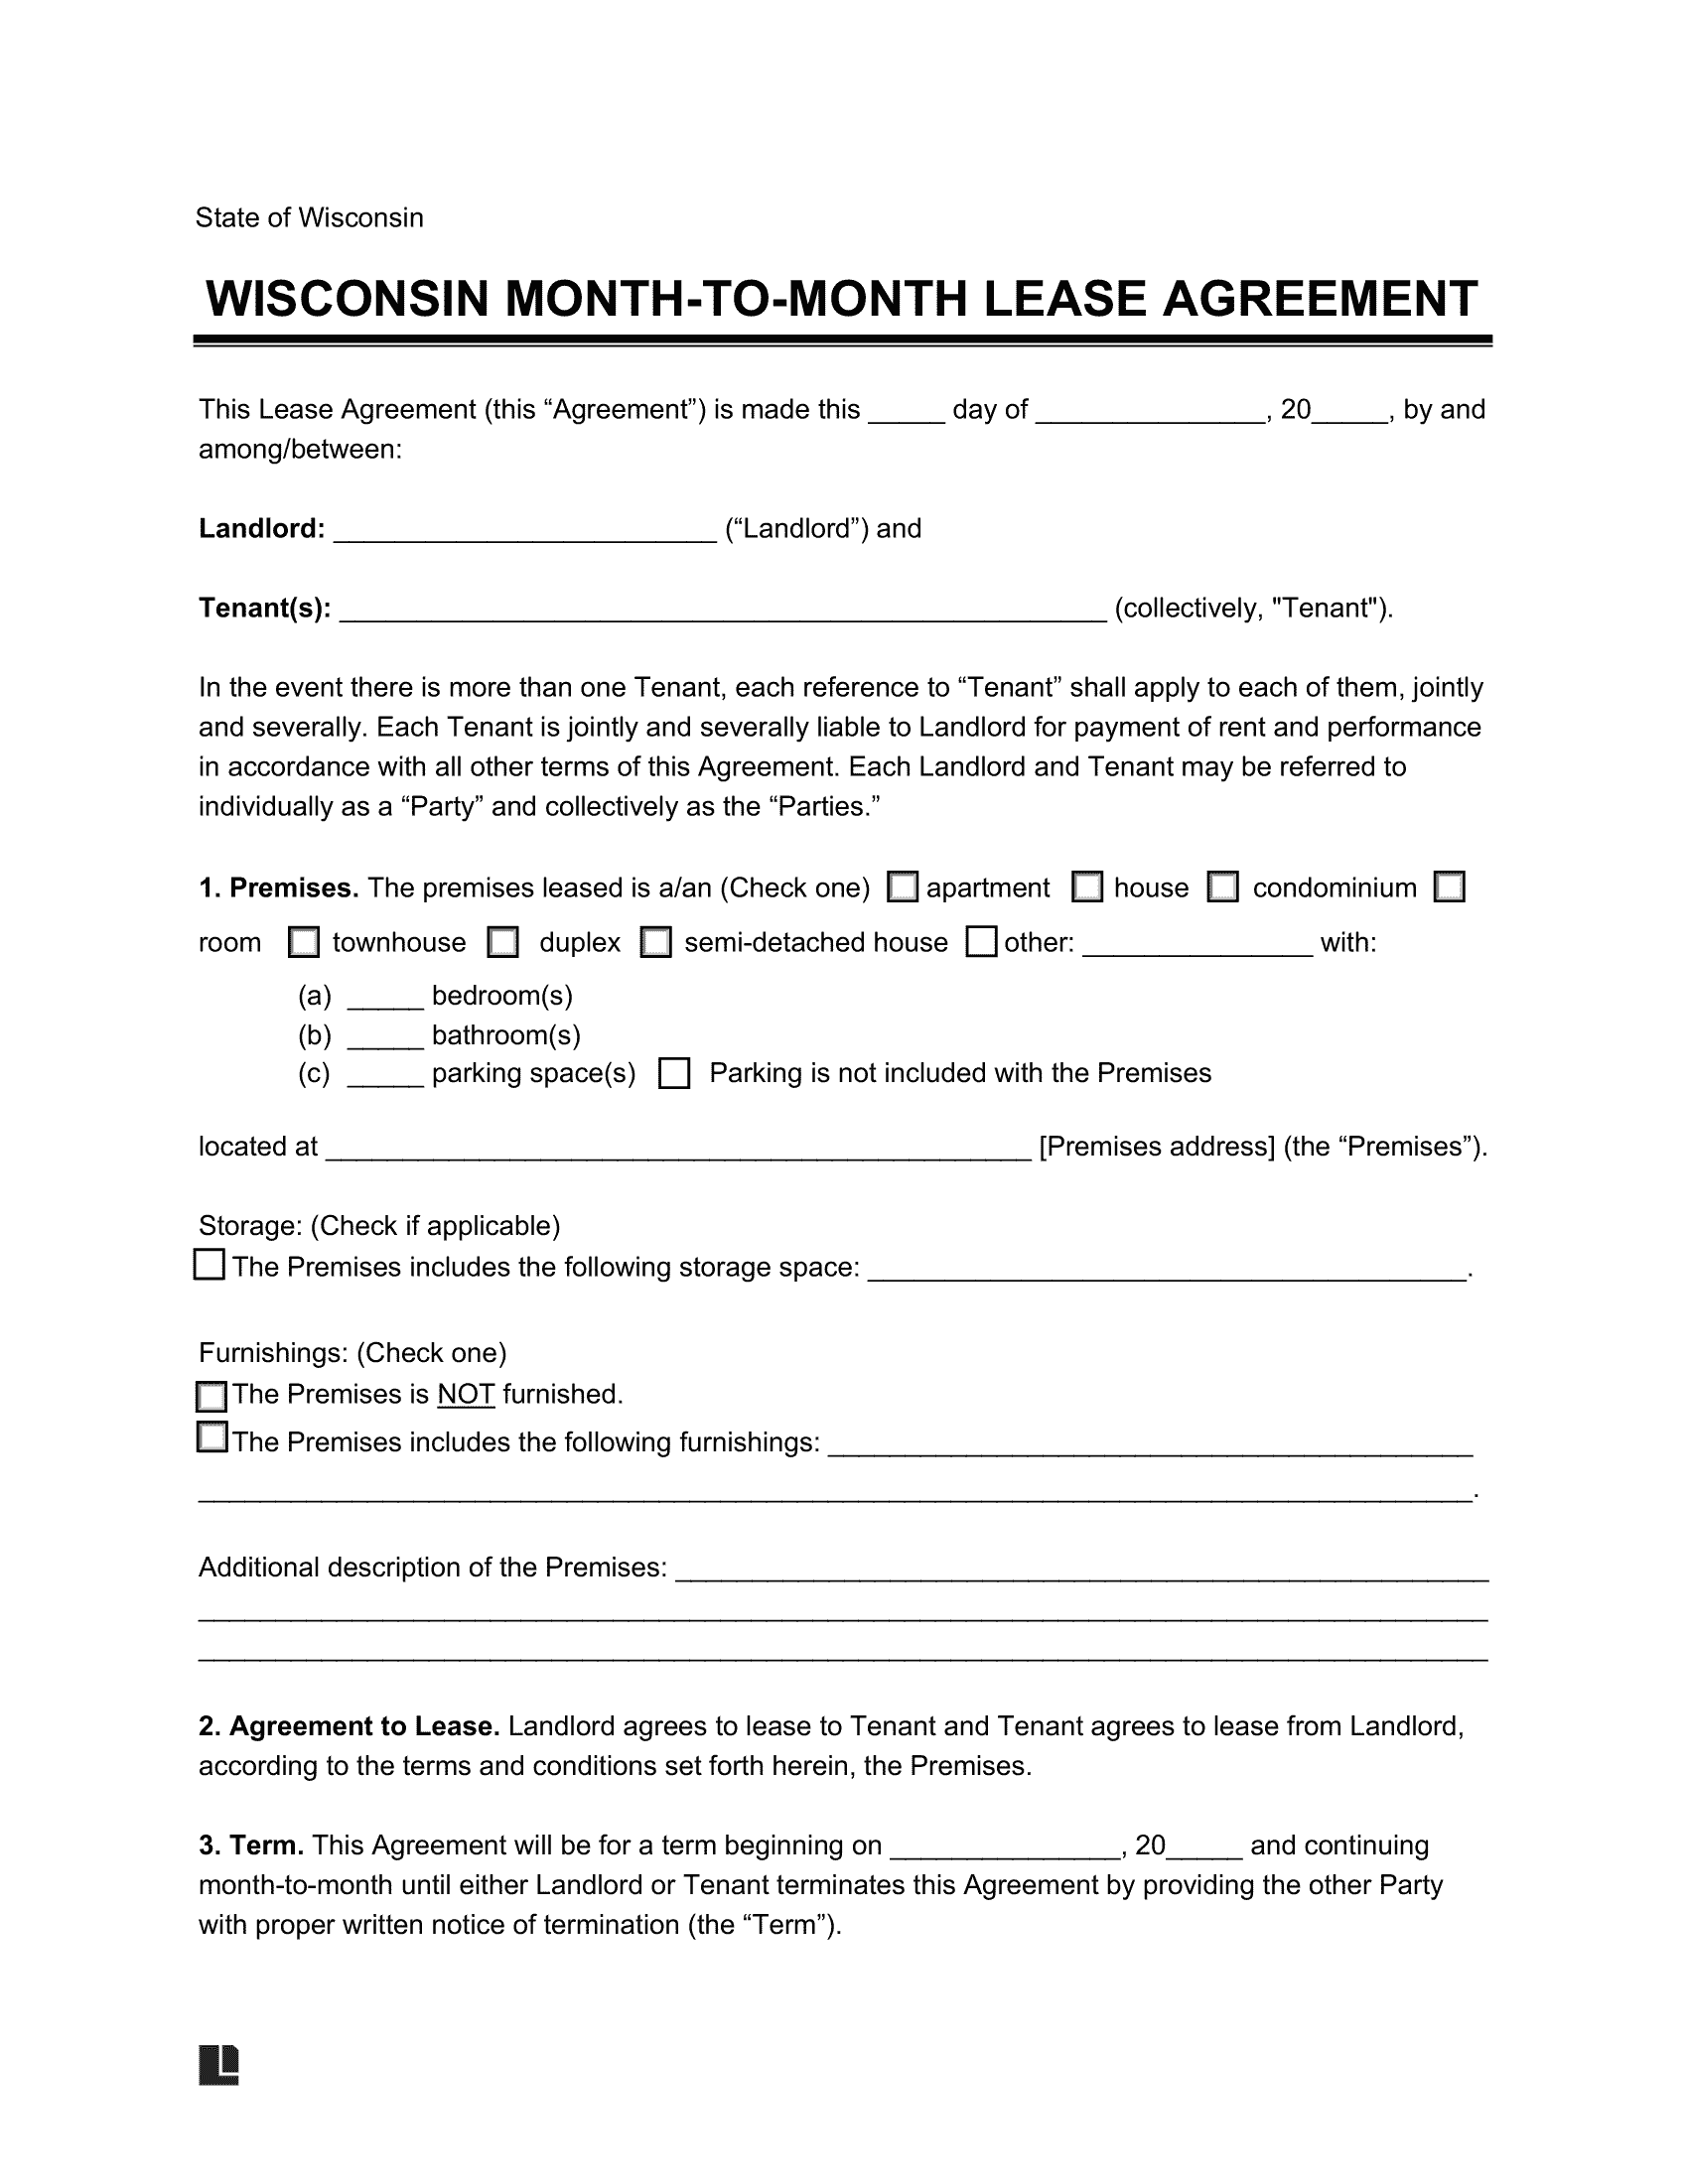 Wisconsin Month-to-Month Rental Agreement